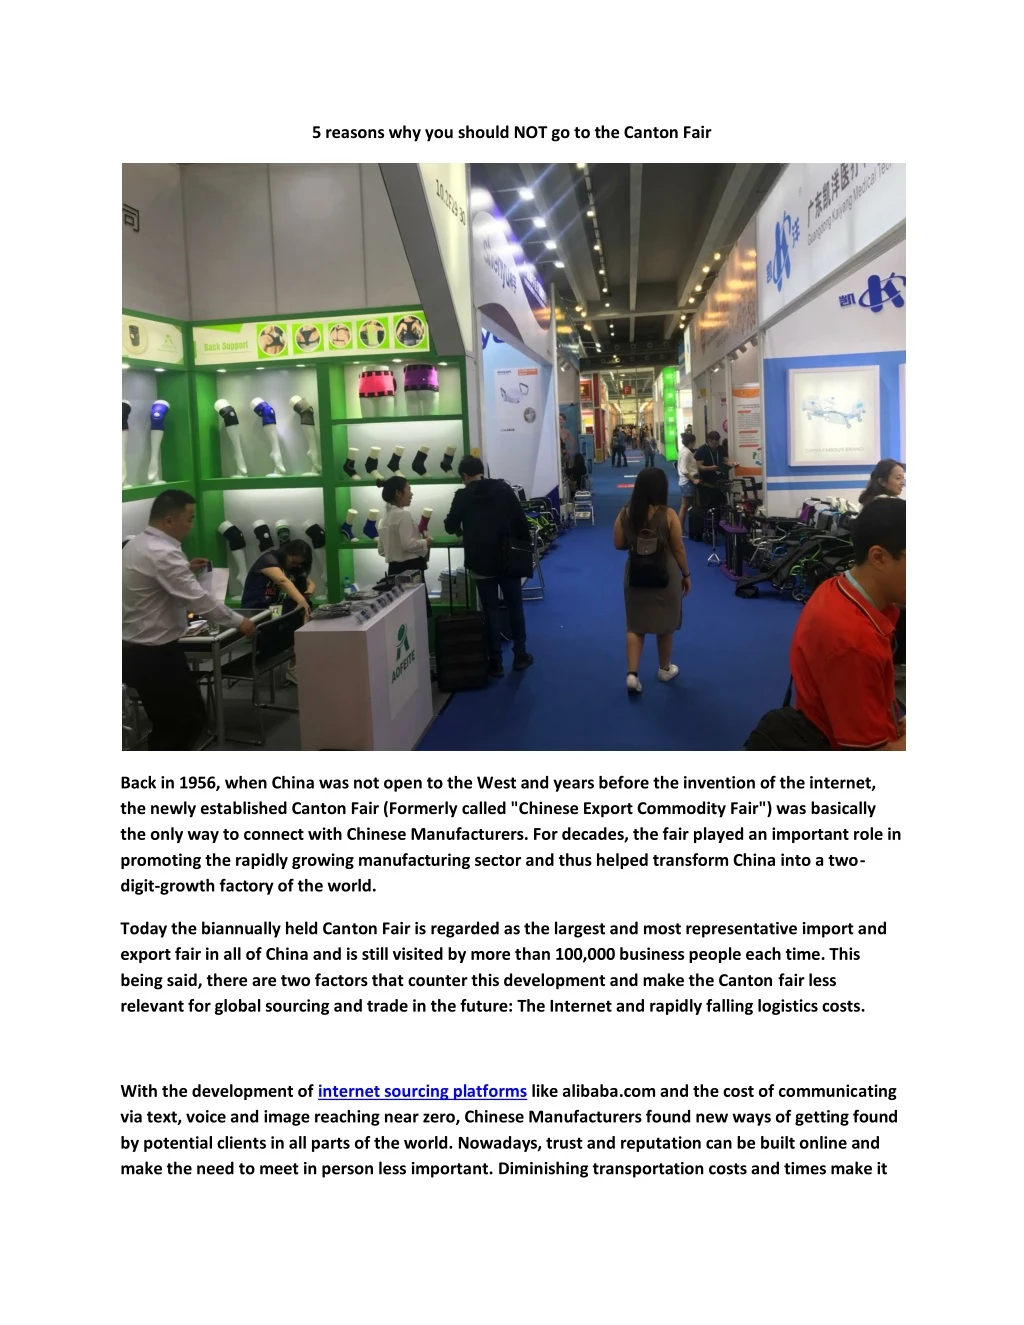 5 reasons why you should not go to the canton fair